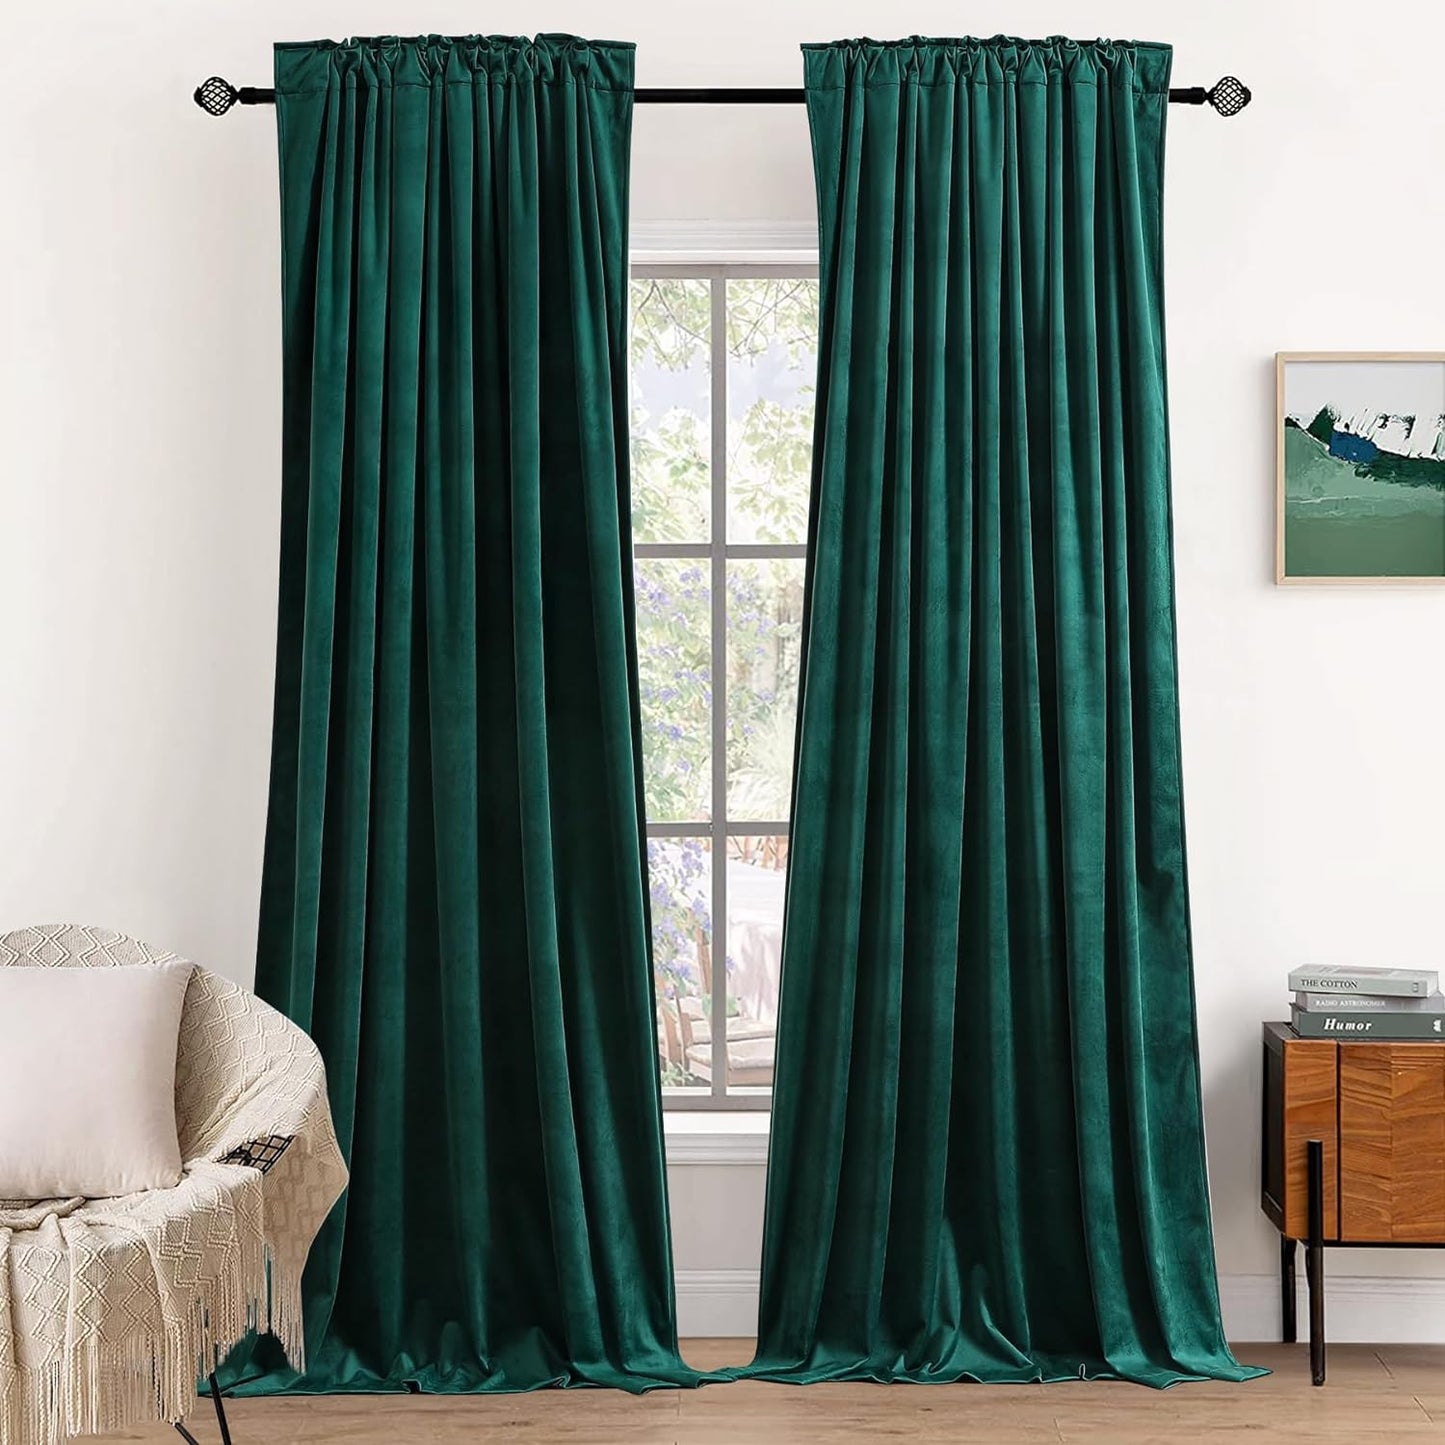 Dchola Olive Green Velvet Curtains for Bedroom Window, Super Soft Vintage Luxury Heavy Drapes, Room Darkening Rod Pocket Curtain for Living Room, W52 by L84 Inches, 2 Panels  Dchola Emerald Green W52*L108 